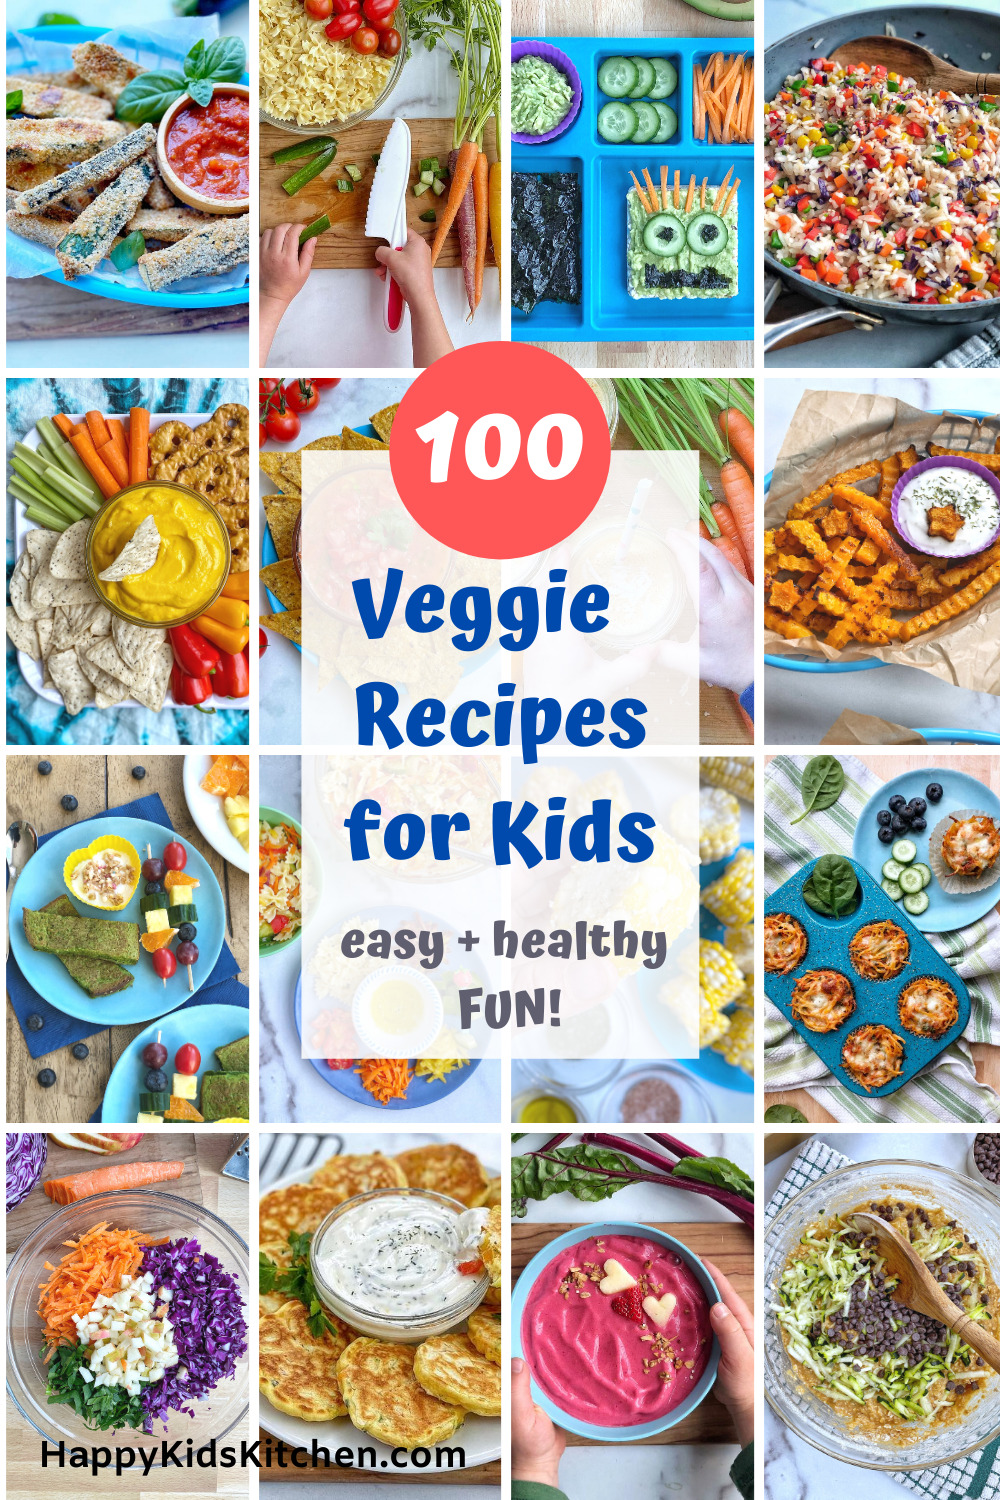 Quick & Easy Vegetables for Lunch Recipes (All Kid-Friendly!)